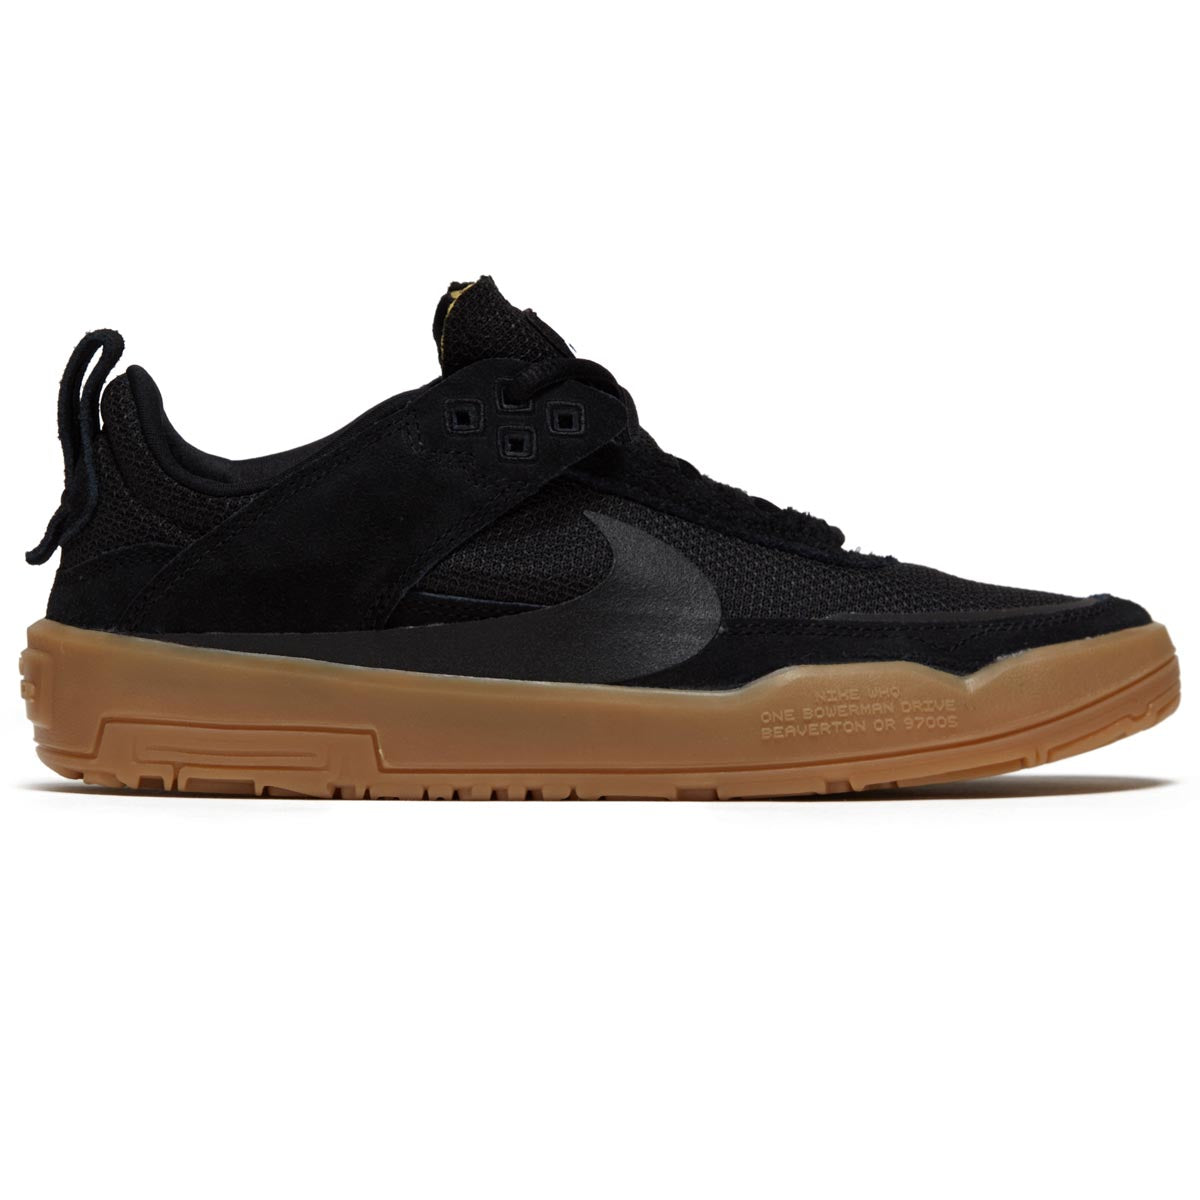 Nike SB Youth Day One Shoes - Black/Black/Gum Light Brown/White image 1